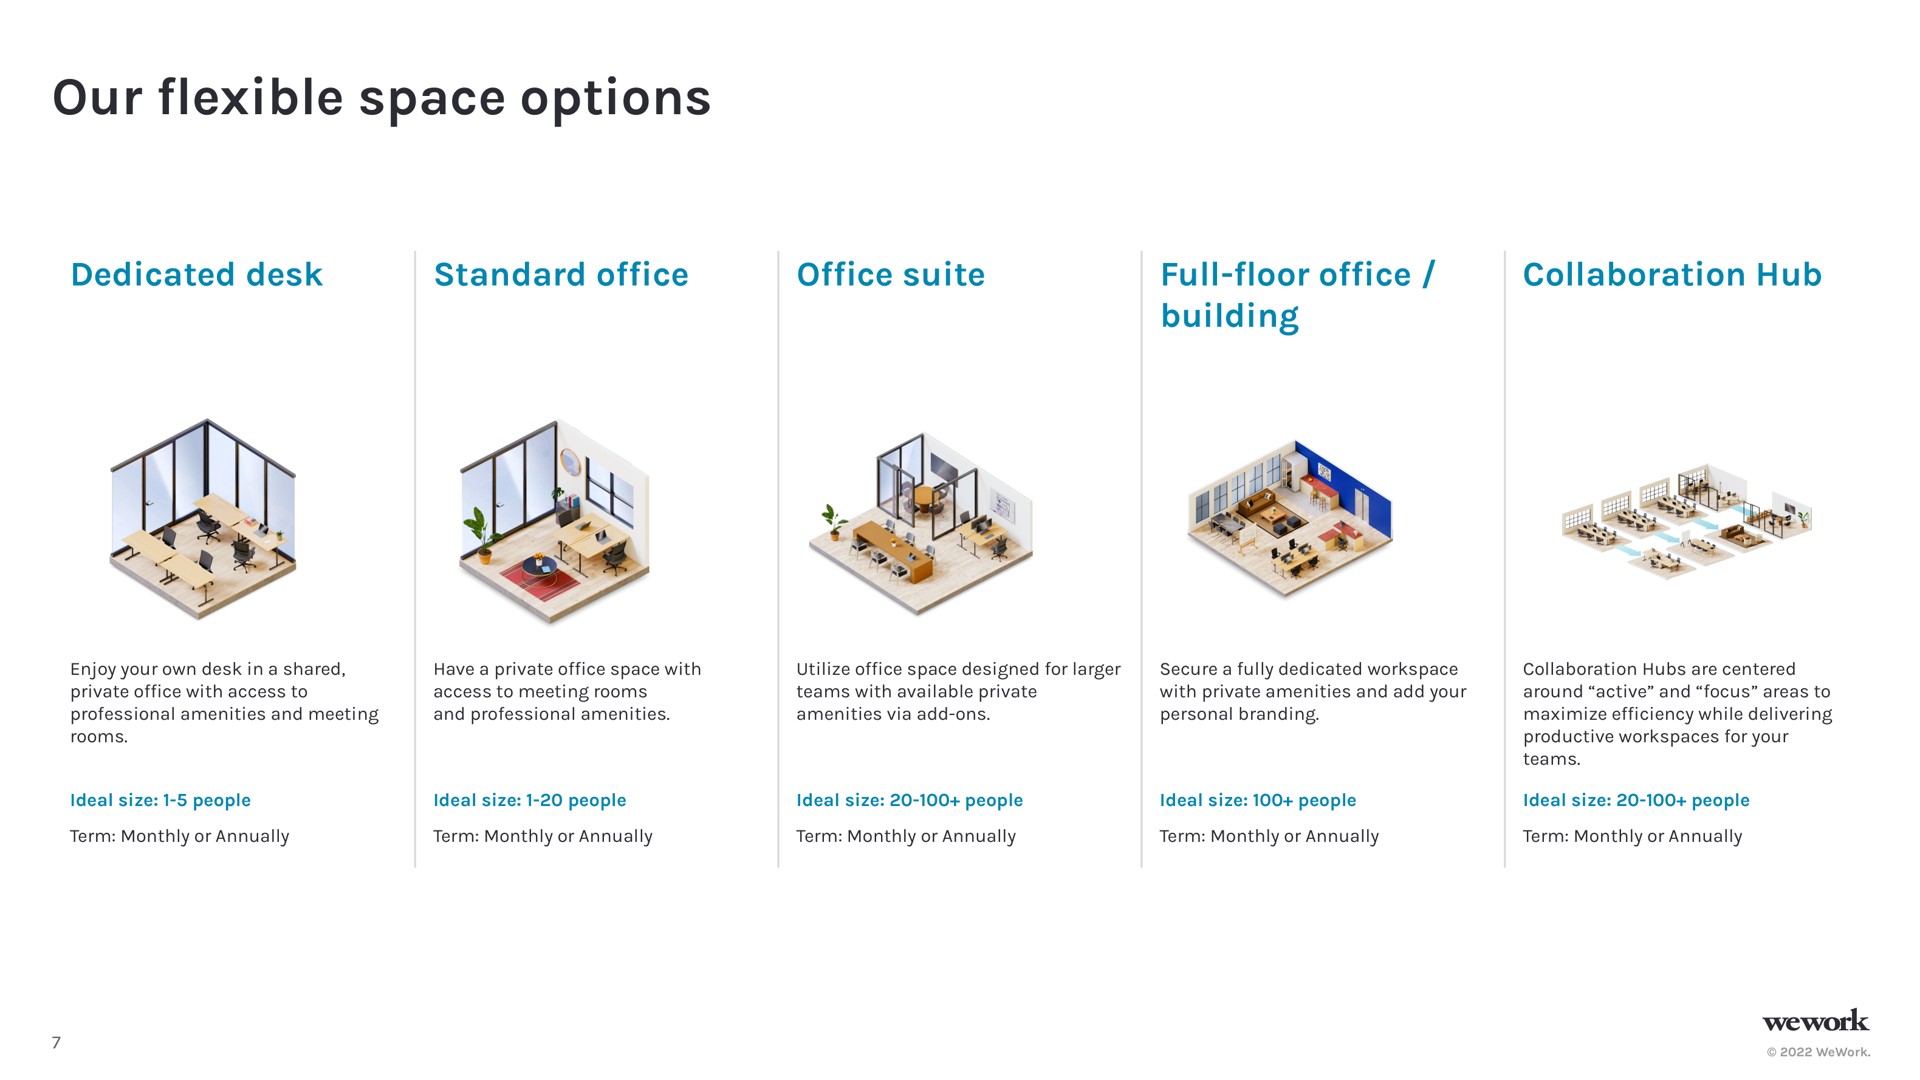 our space options flexible building cates | WeWork